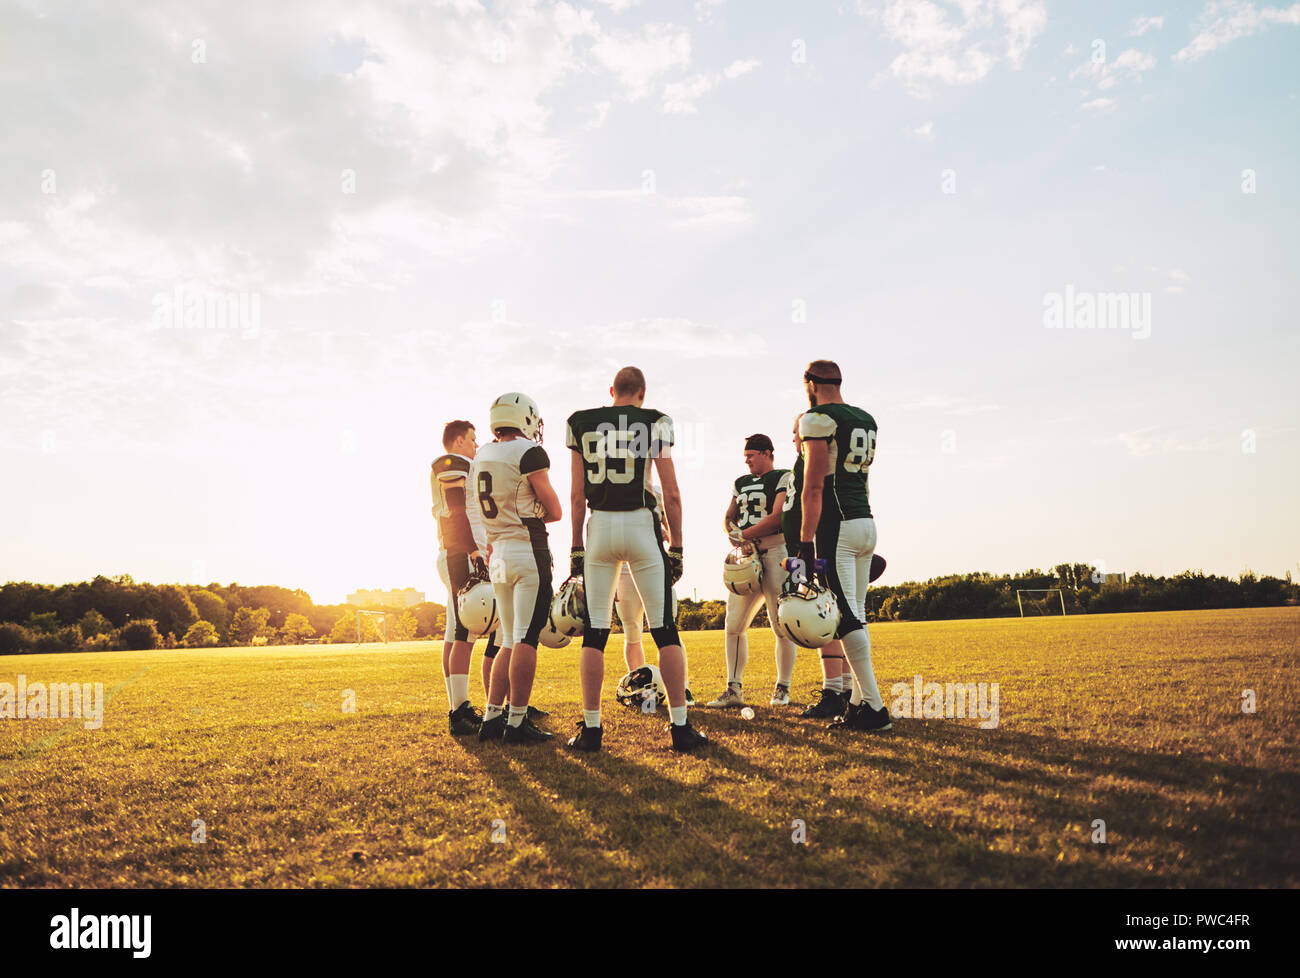 Group of young American football players discussing strategy during practice while standing together on a sports field in the afternoon Stock Photo